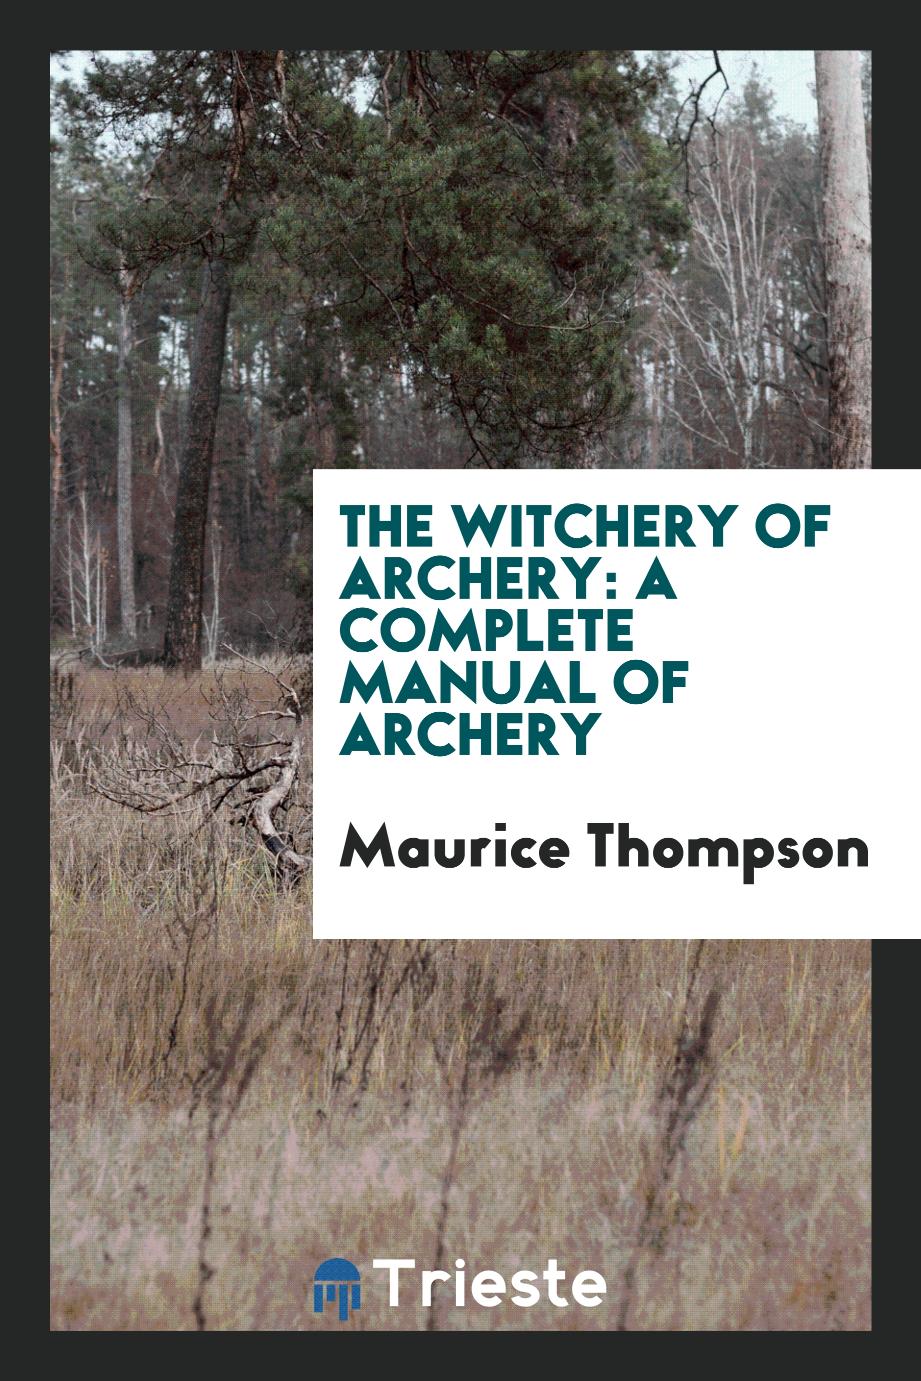 The witchery of archery: a complete manual of archery